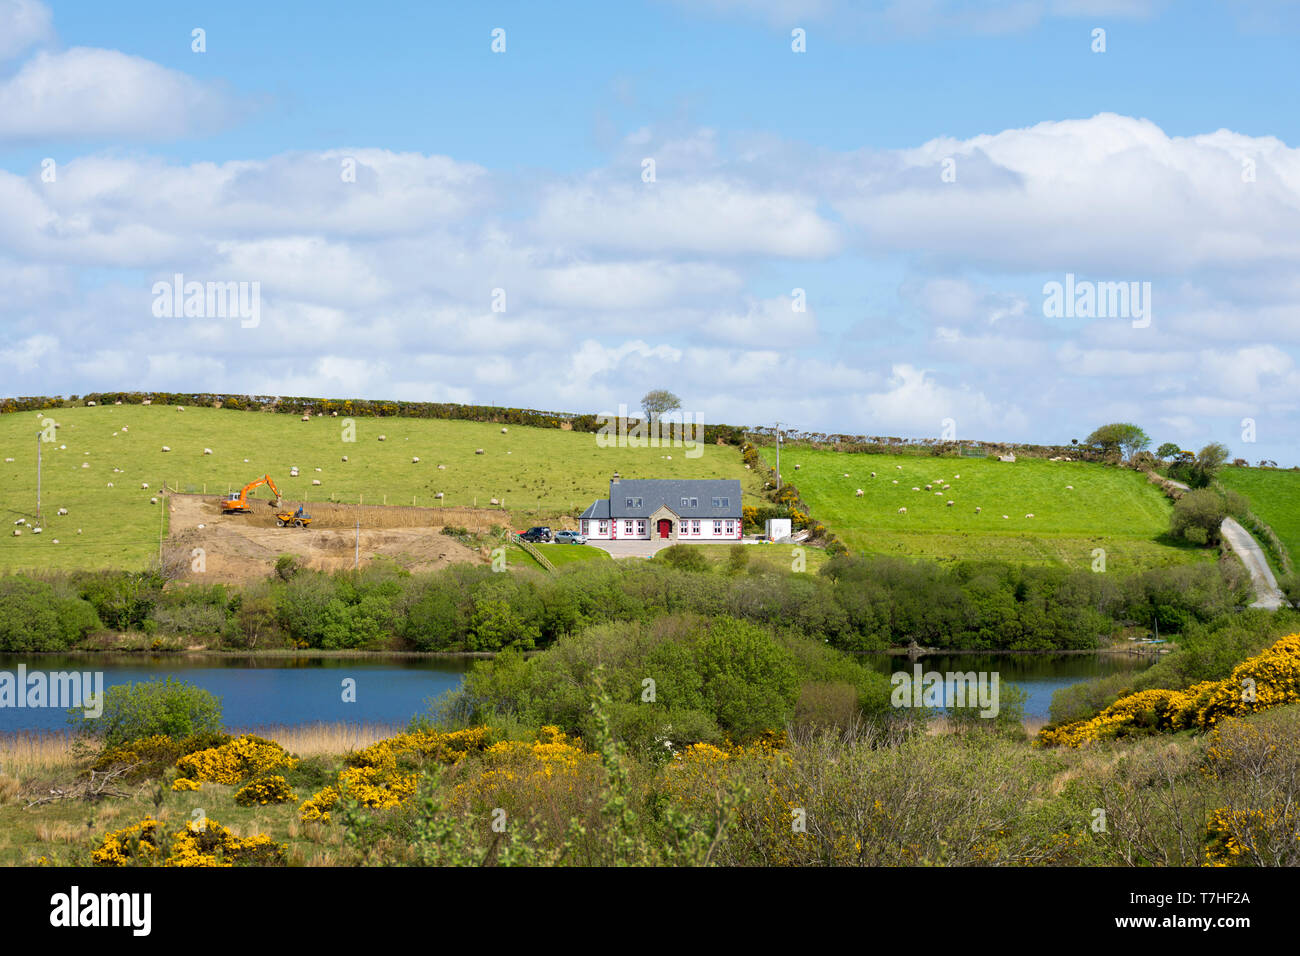 Work beginning on a new housing plot or site in rural Ireland, County Donegal. Stock Photo